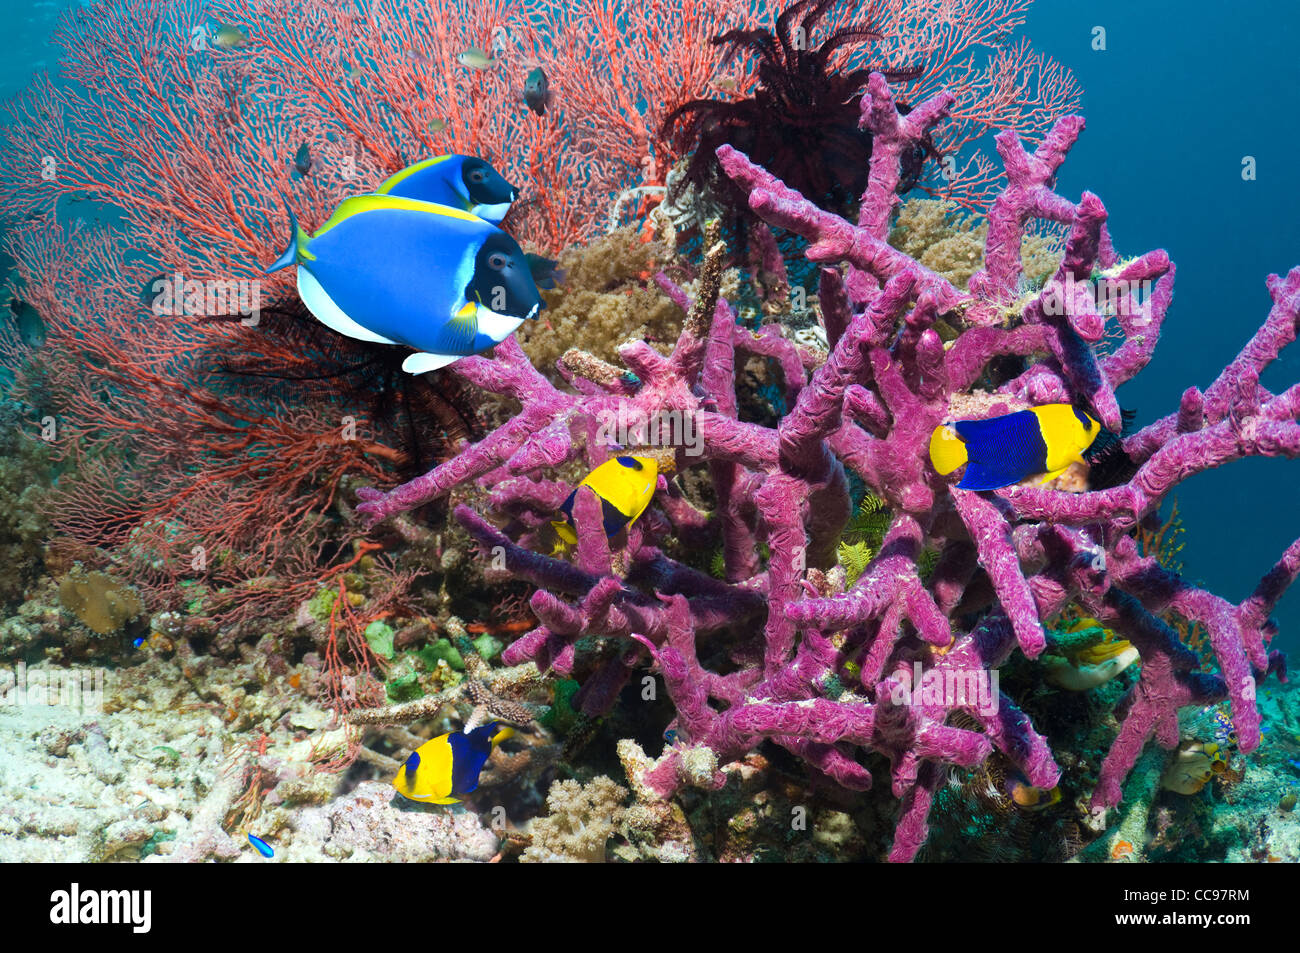 Powder-blue surgeonfish and Bicolor angelfish on coral reef Stock Photo